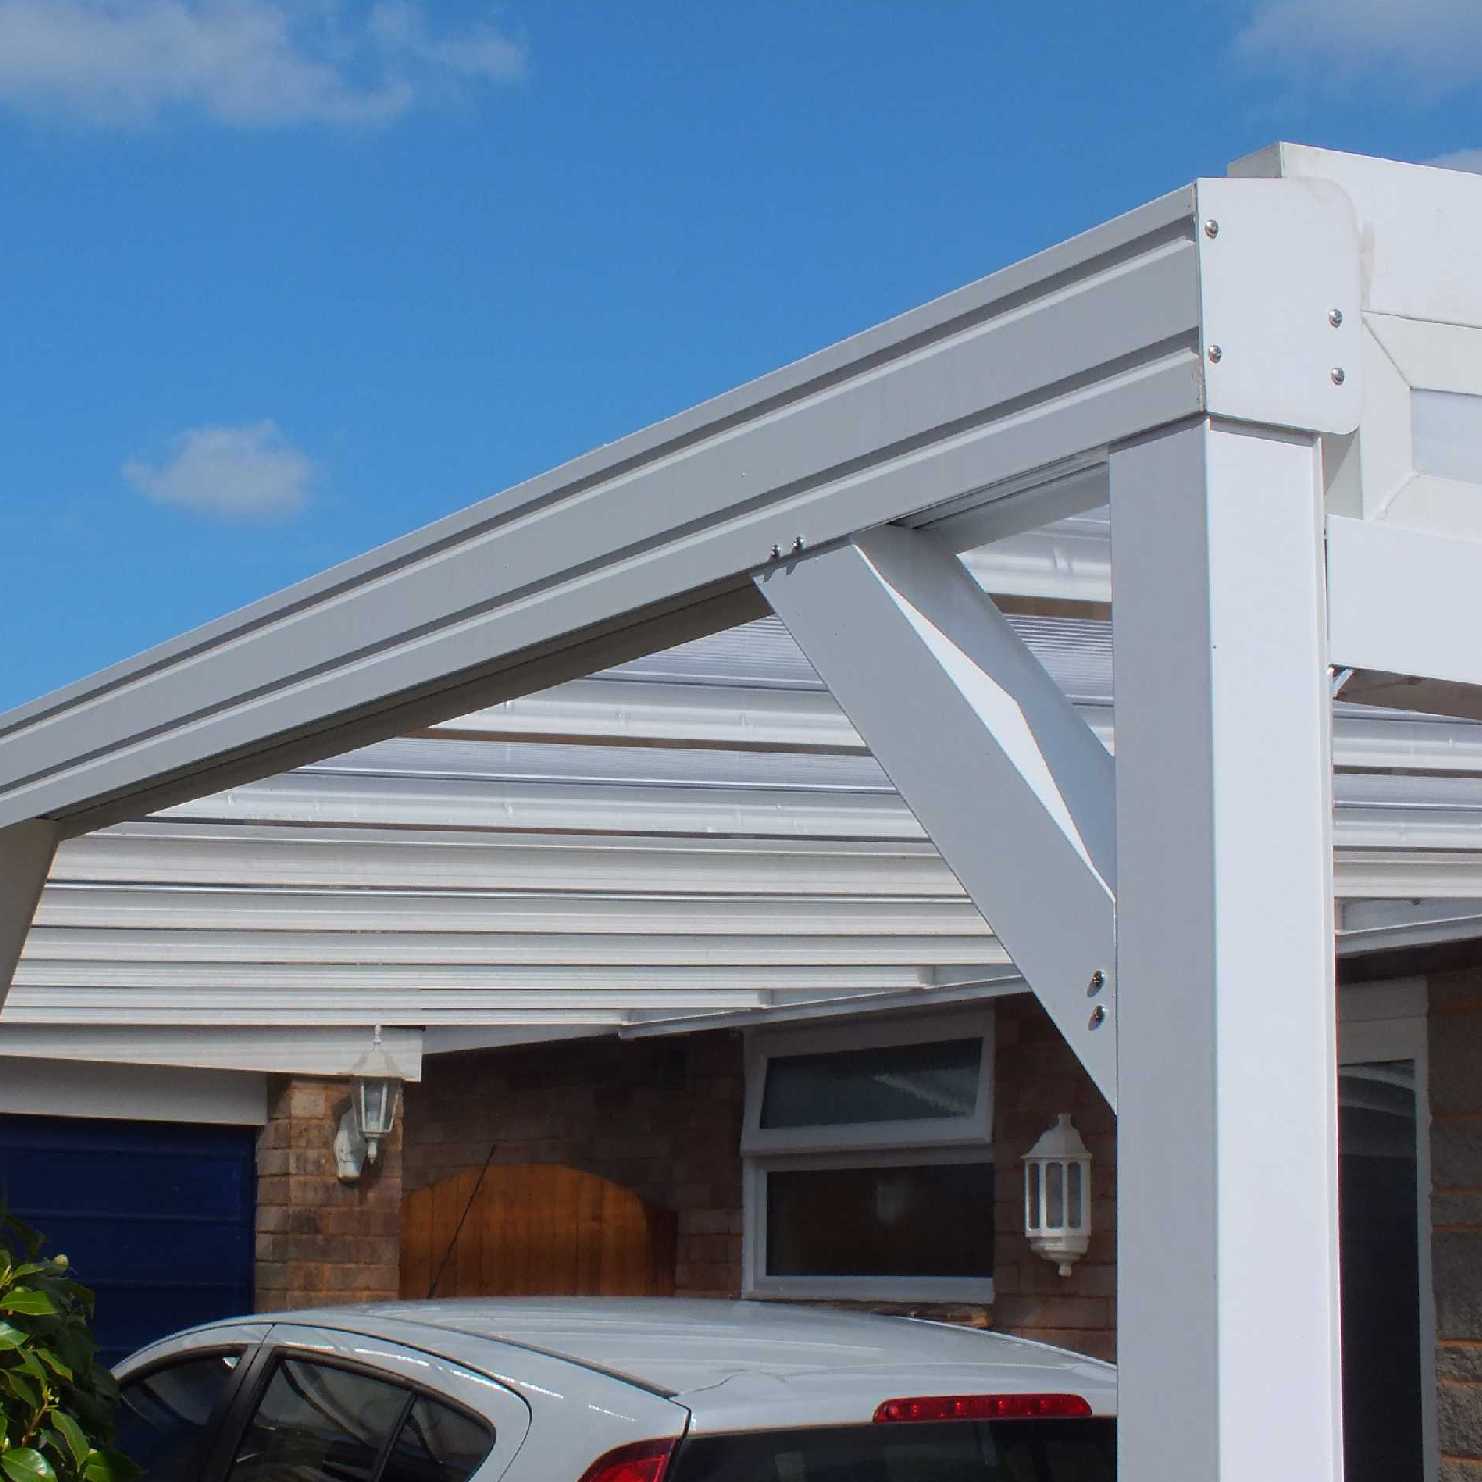 Buy Omega Smart Lean-To Canopy, White with 16mm Polycarbonate Glazing - 7.4m (W) x 3.0m (P), (4) Supporting Posts online today